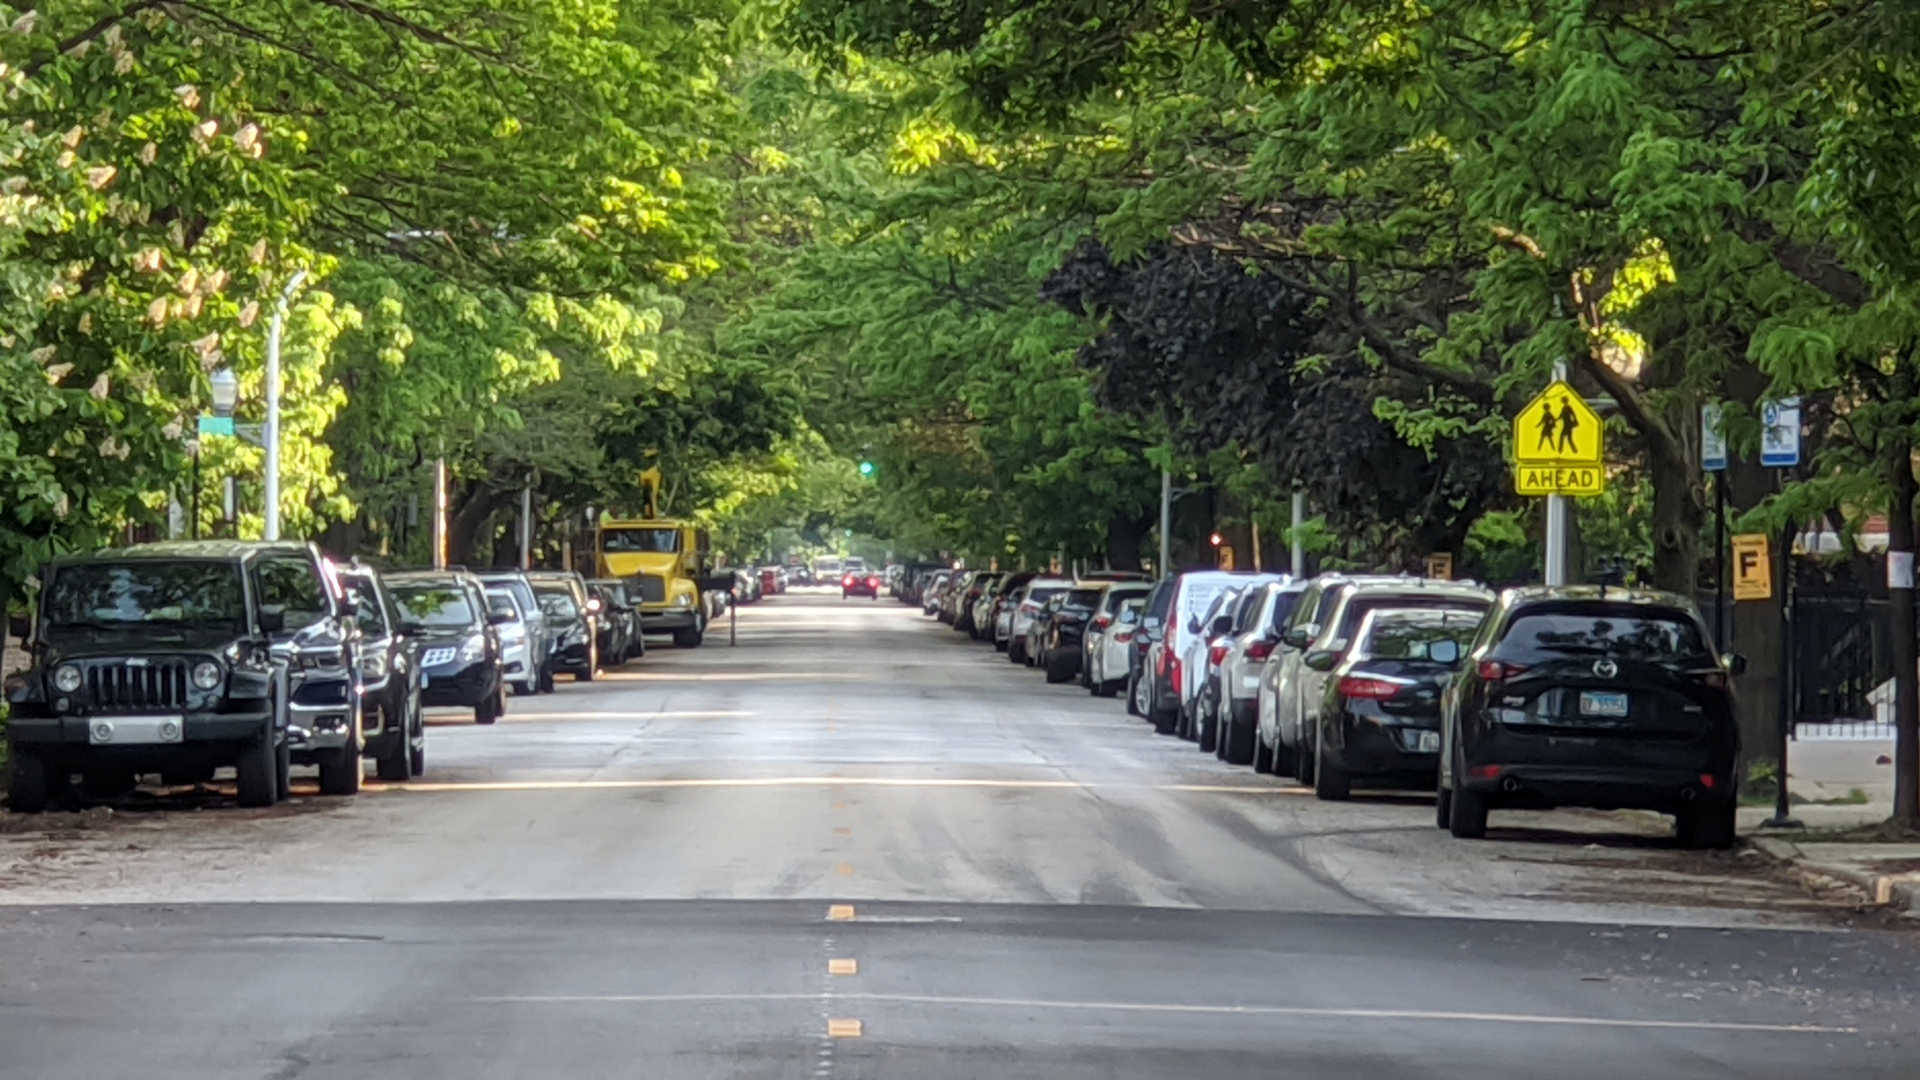 Parking Issues – Line Of Cars Parked On The Street